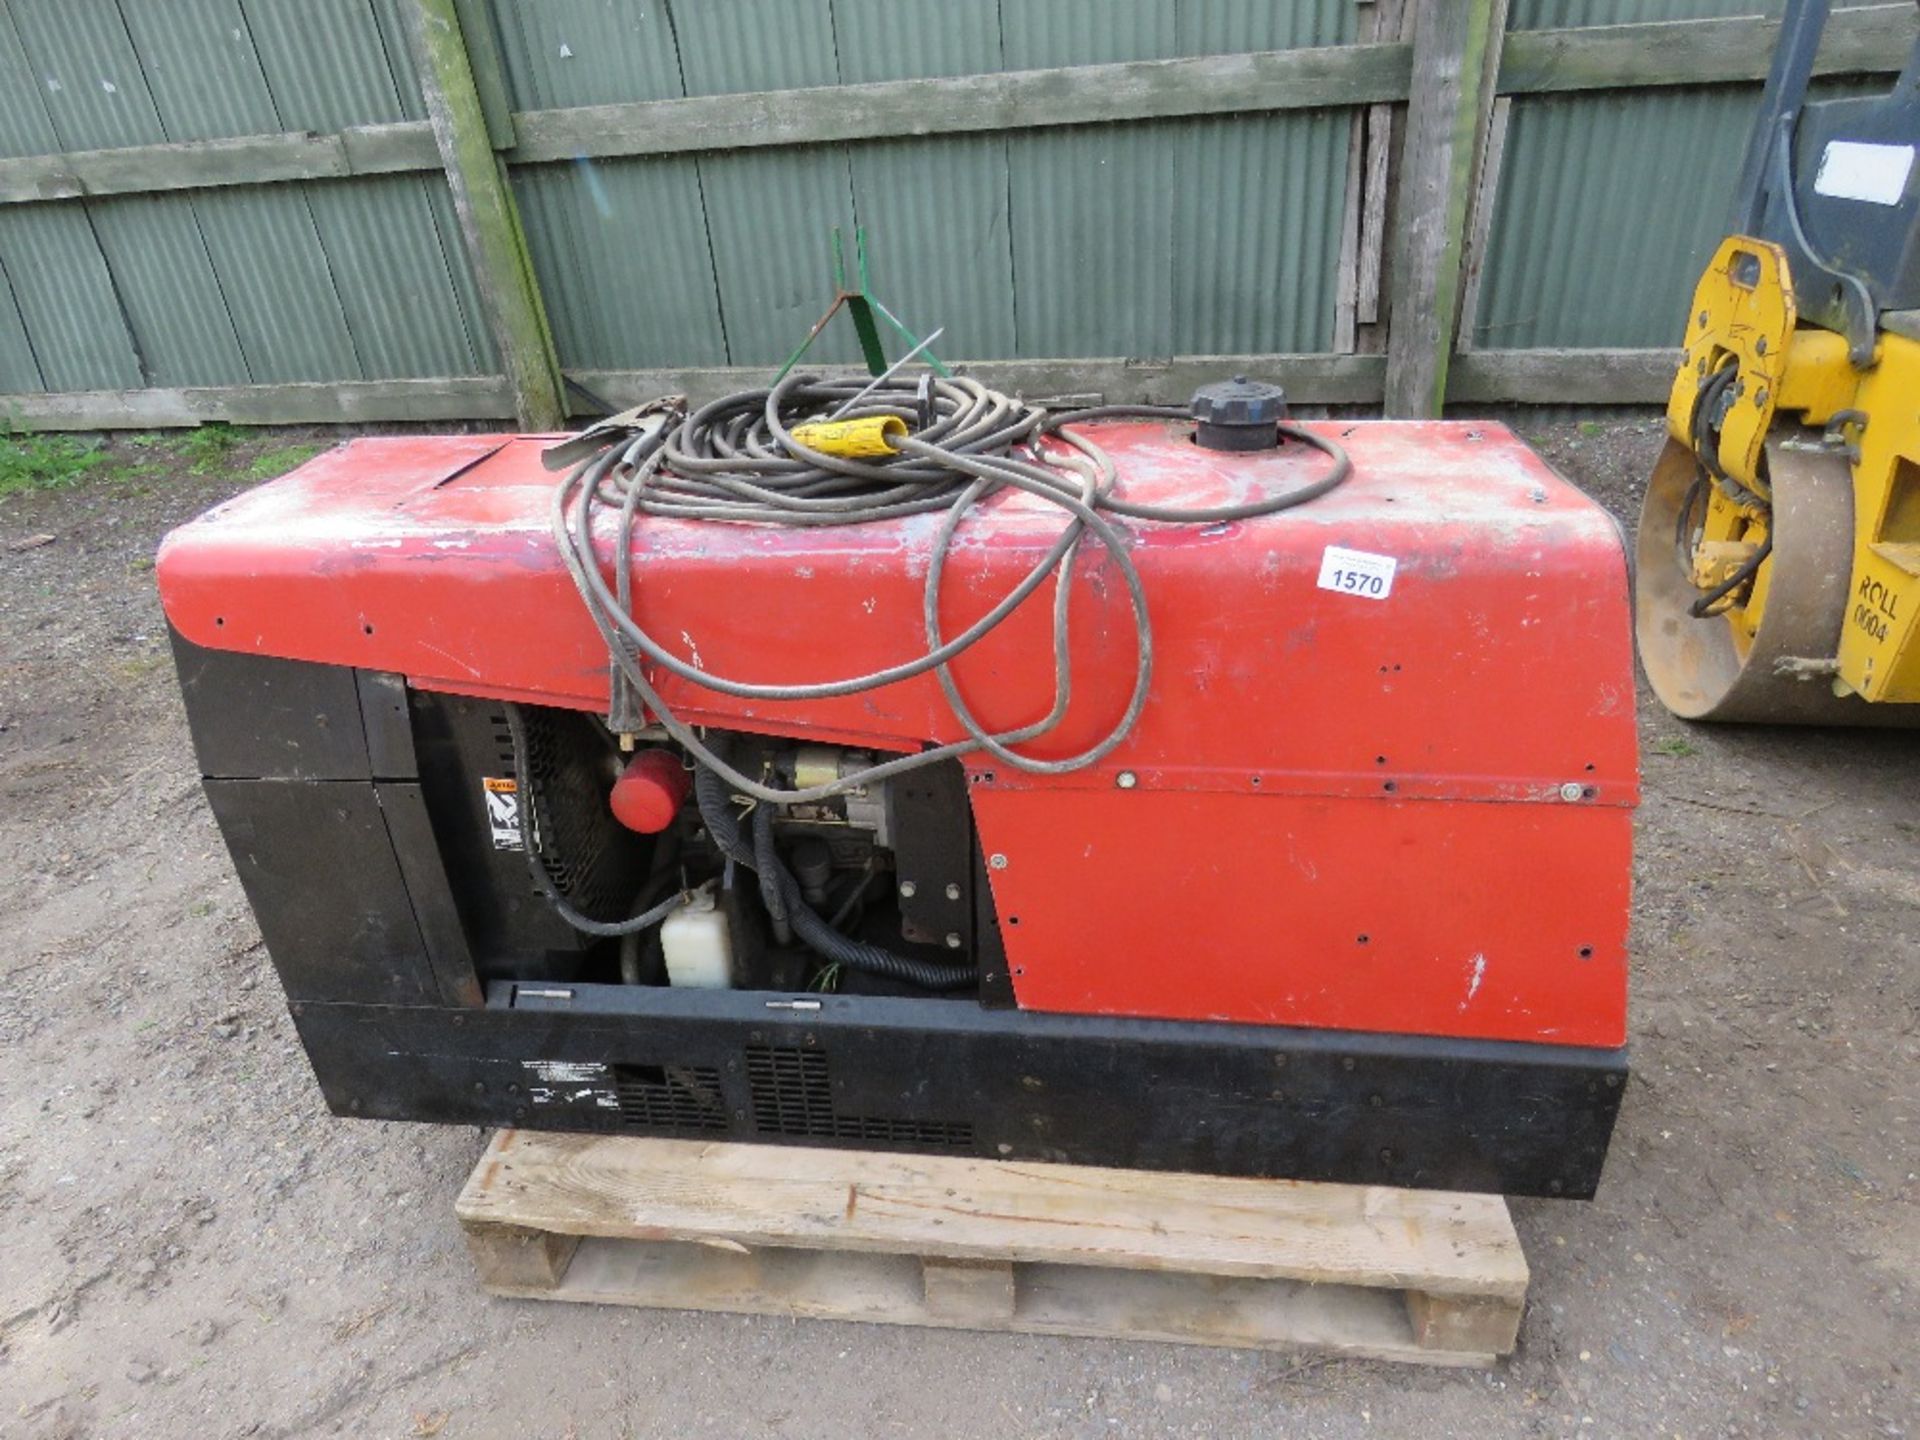 LINCOLN RANGER 305D DIESEL ENGINED WELDER GENERATOR SET WITH LEADS. SOURCED FROM COMPANY LIQUIDATION